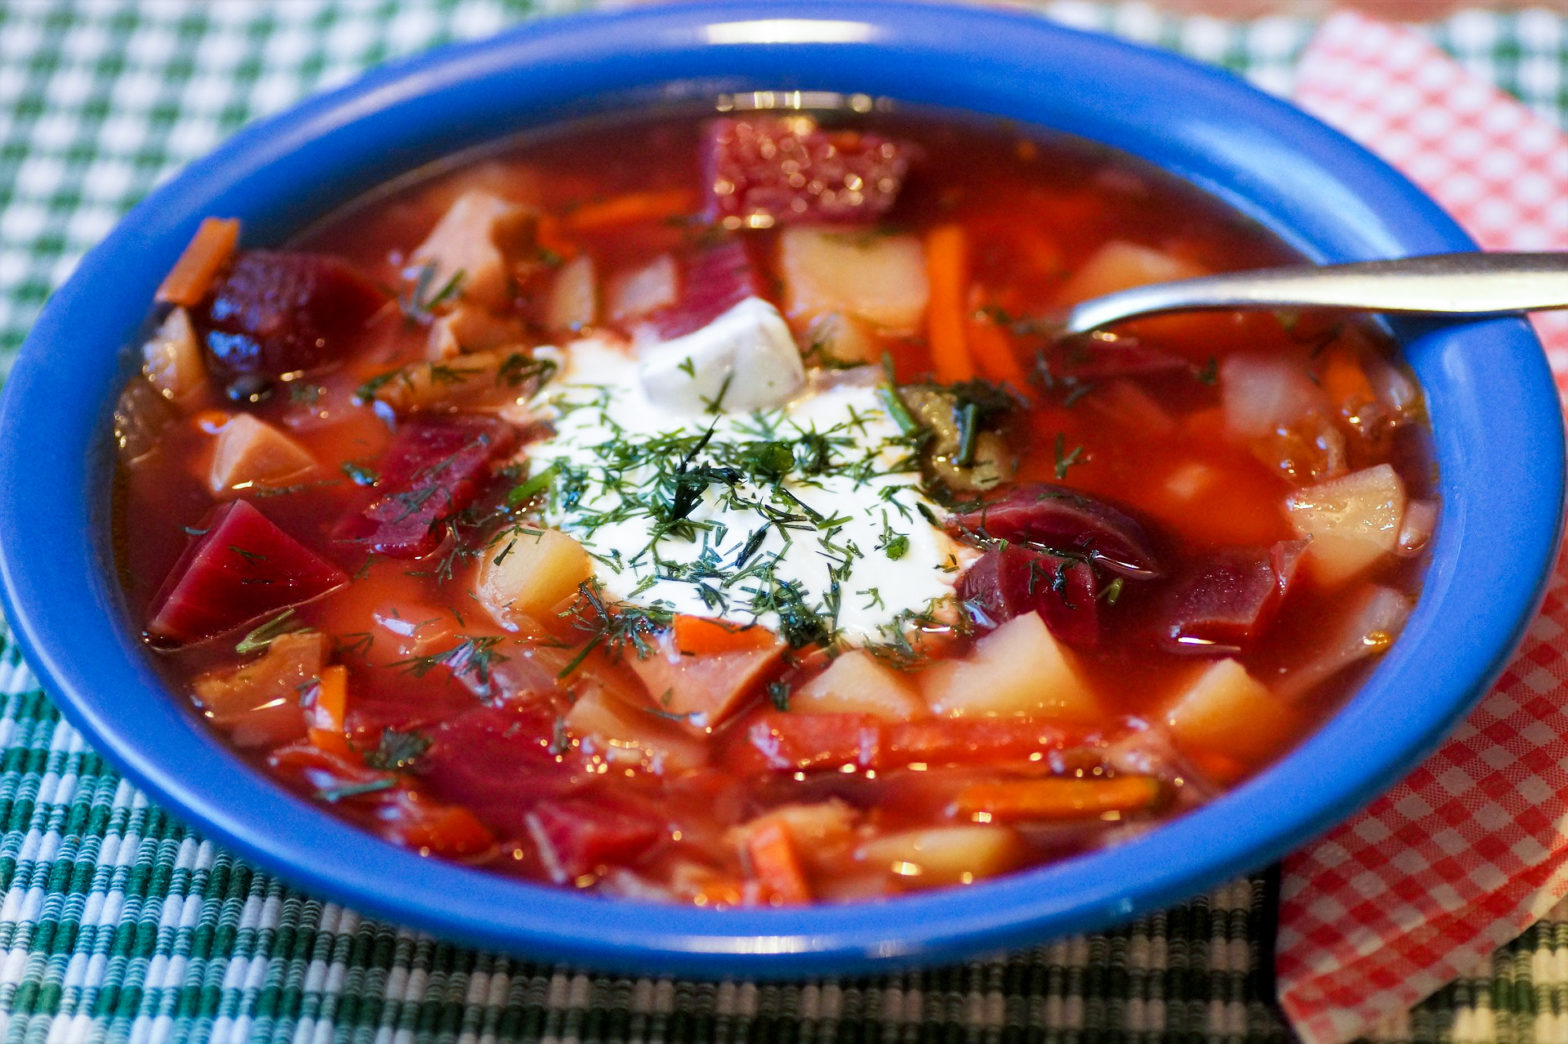 Most Interesting Dishes in the Eastern European Region